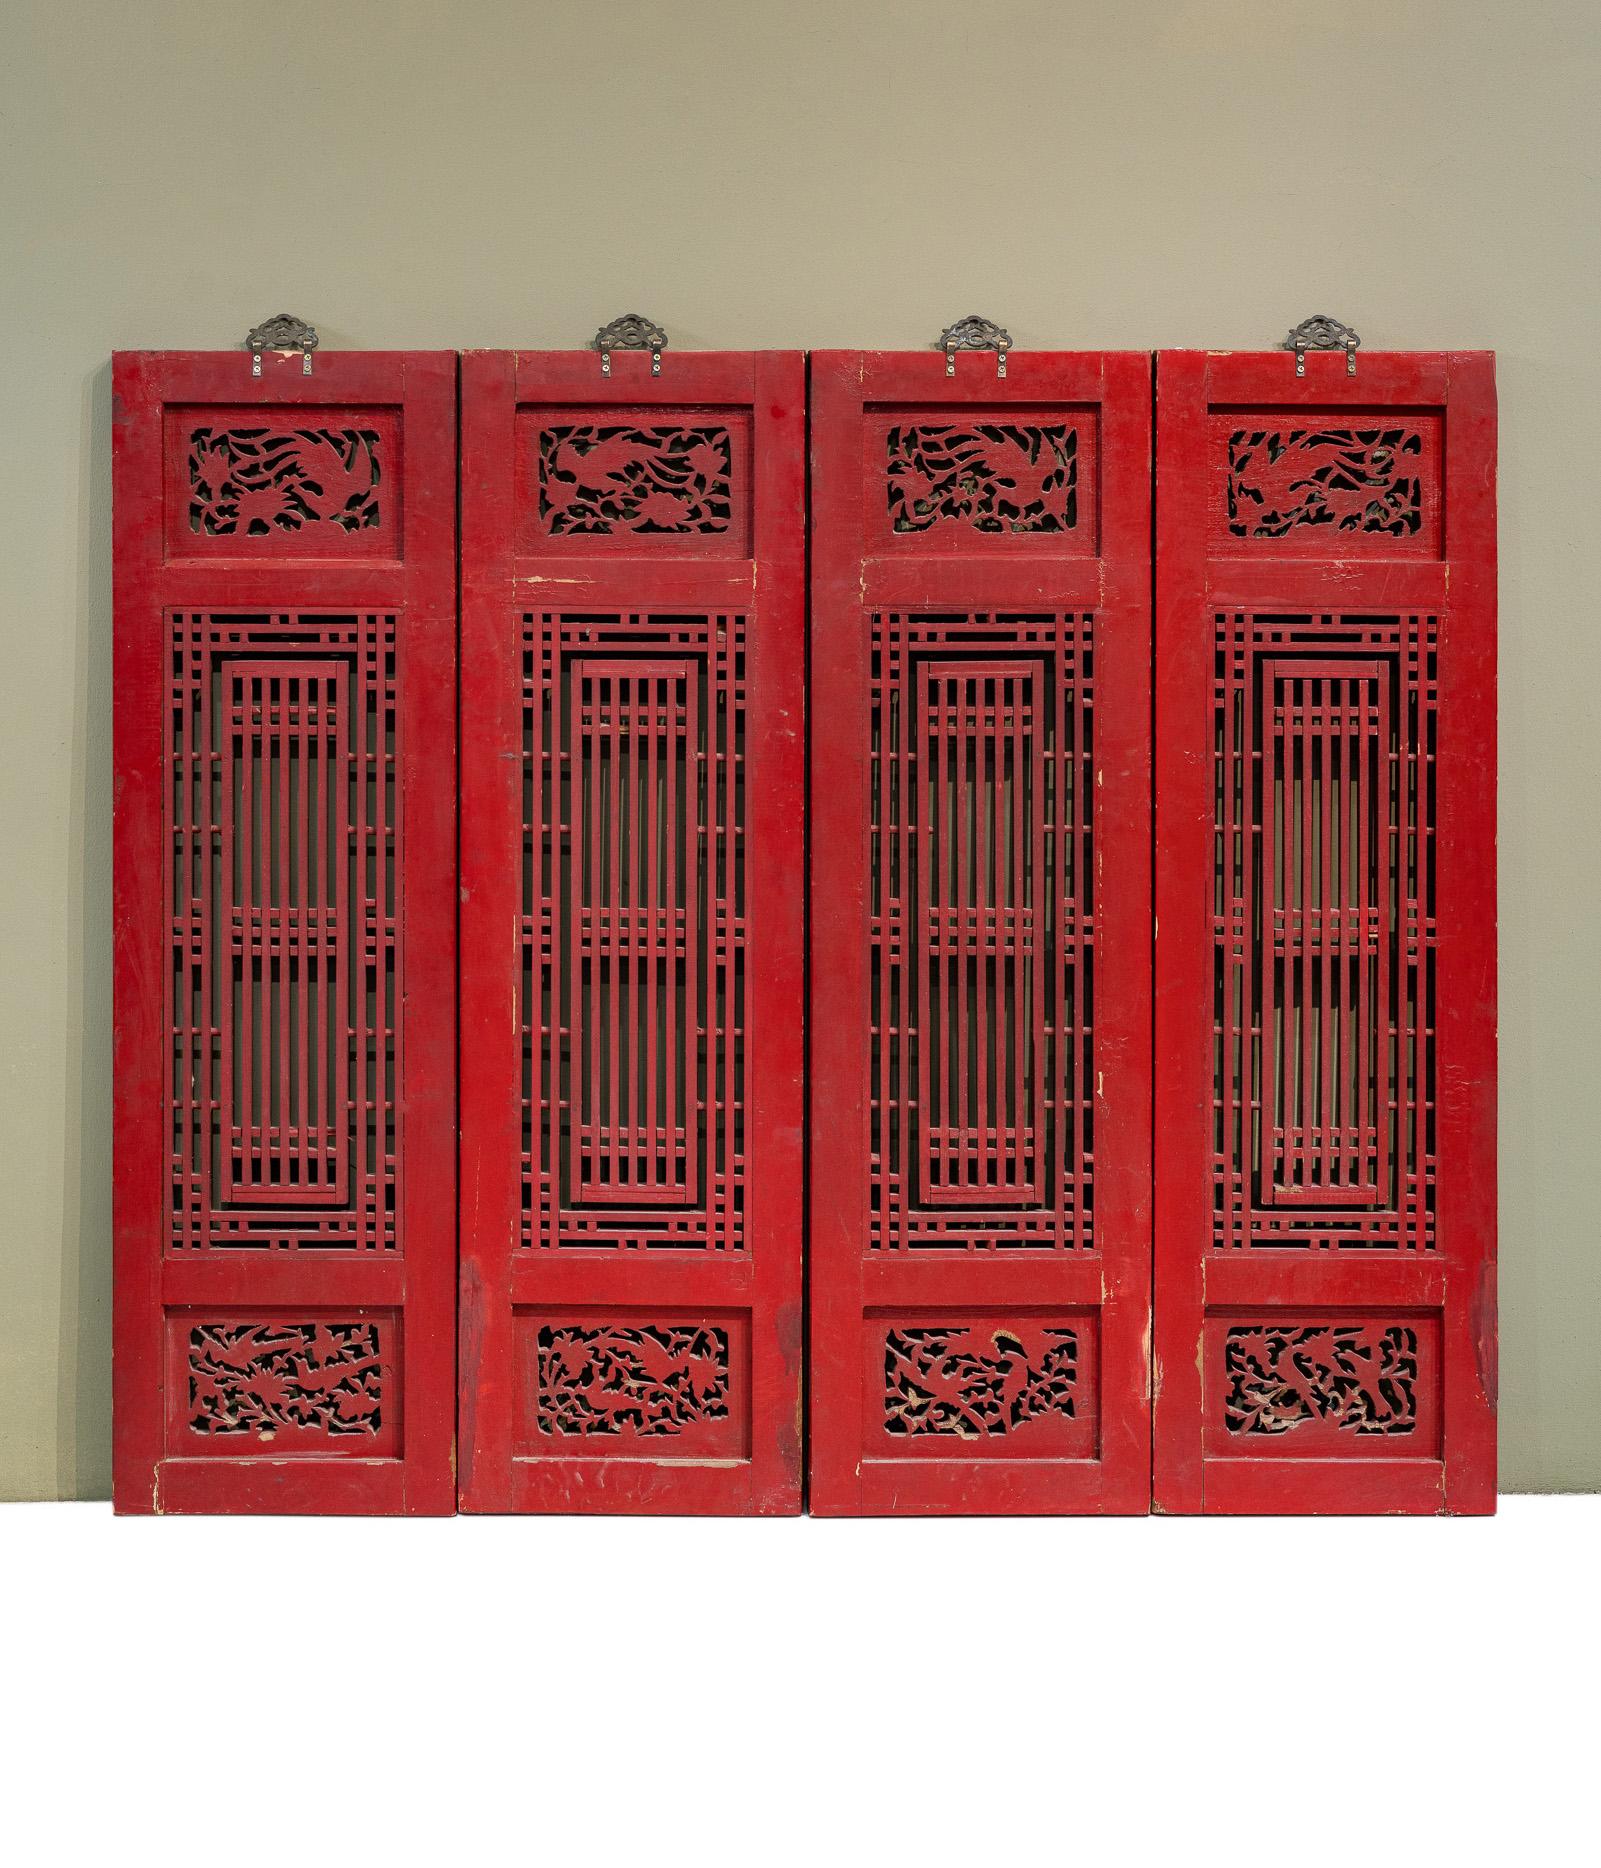 A set of 4 window panels from Fujian province, China. The original hinges have been removed and patched, and new hangers have been added on top, however overall the colours are largely untouched. The small section across the top has carvings of